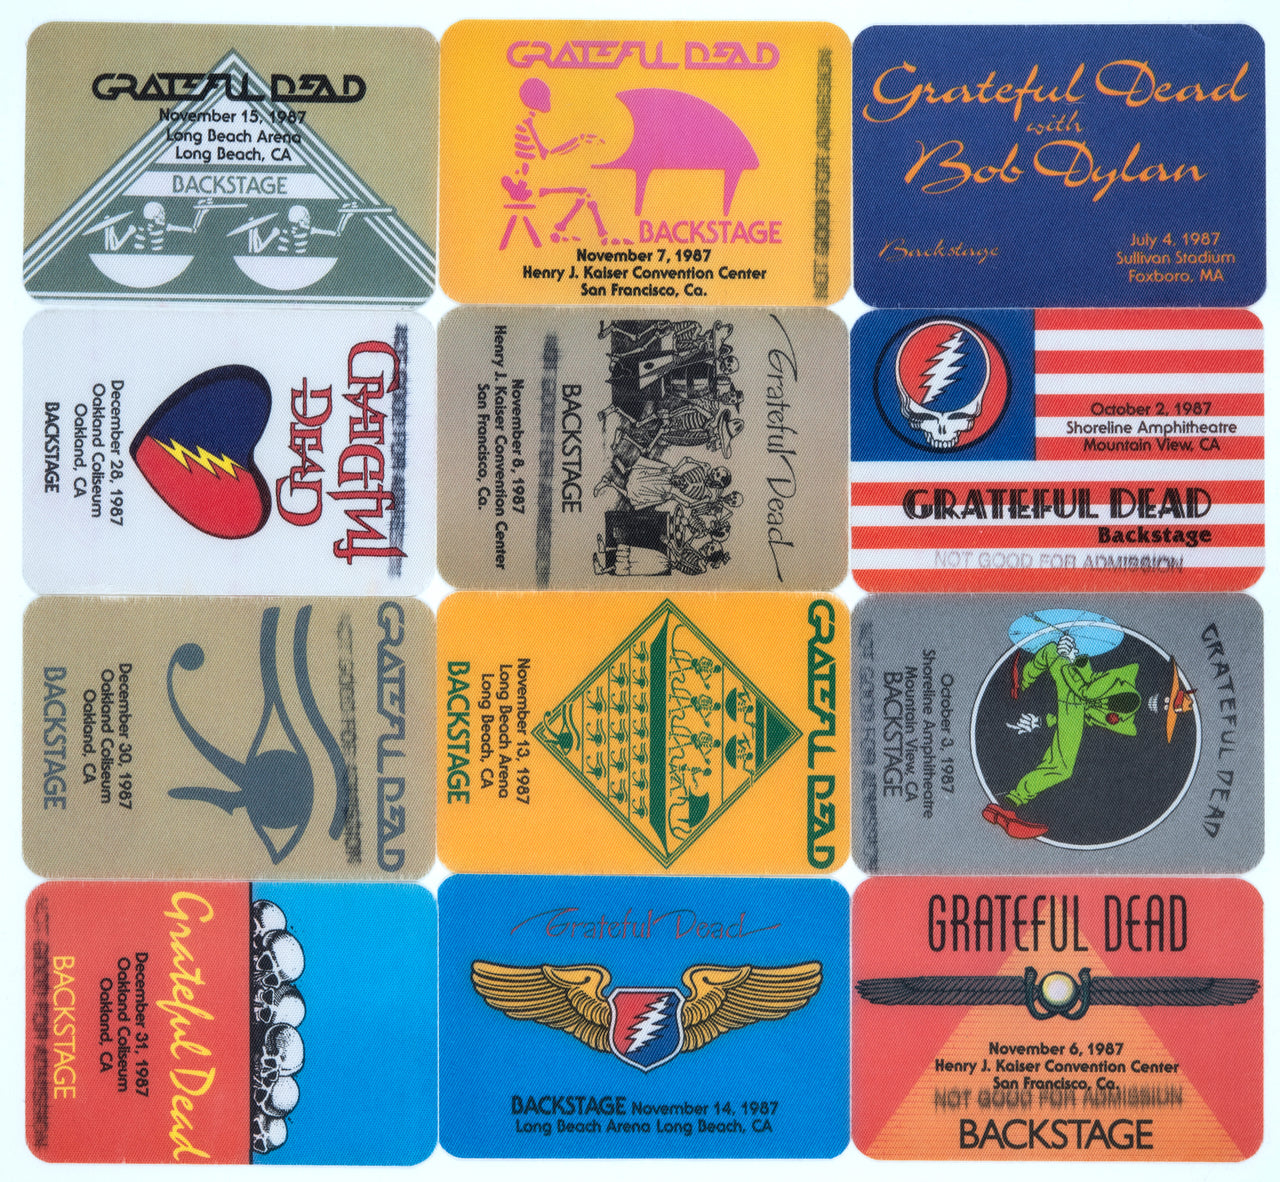 Grateful Dead Backstage Passes (7/4/1987 - 12/31/1987) from Dan Healy